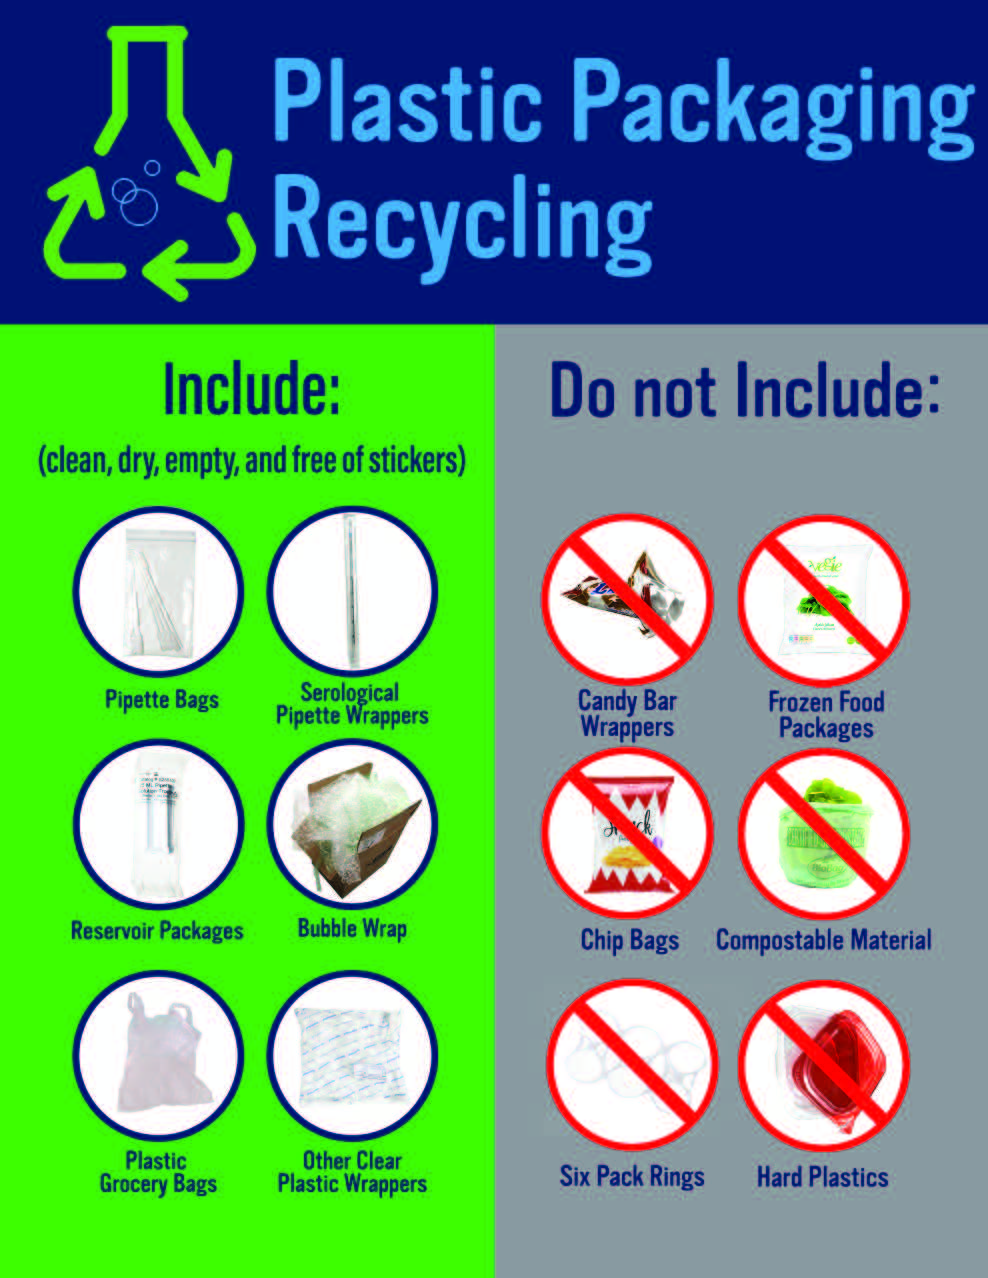 Plastic Packaging Recycling instructions